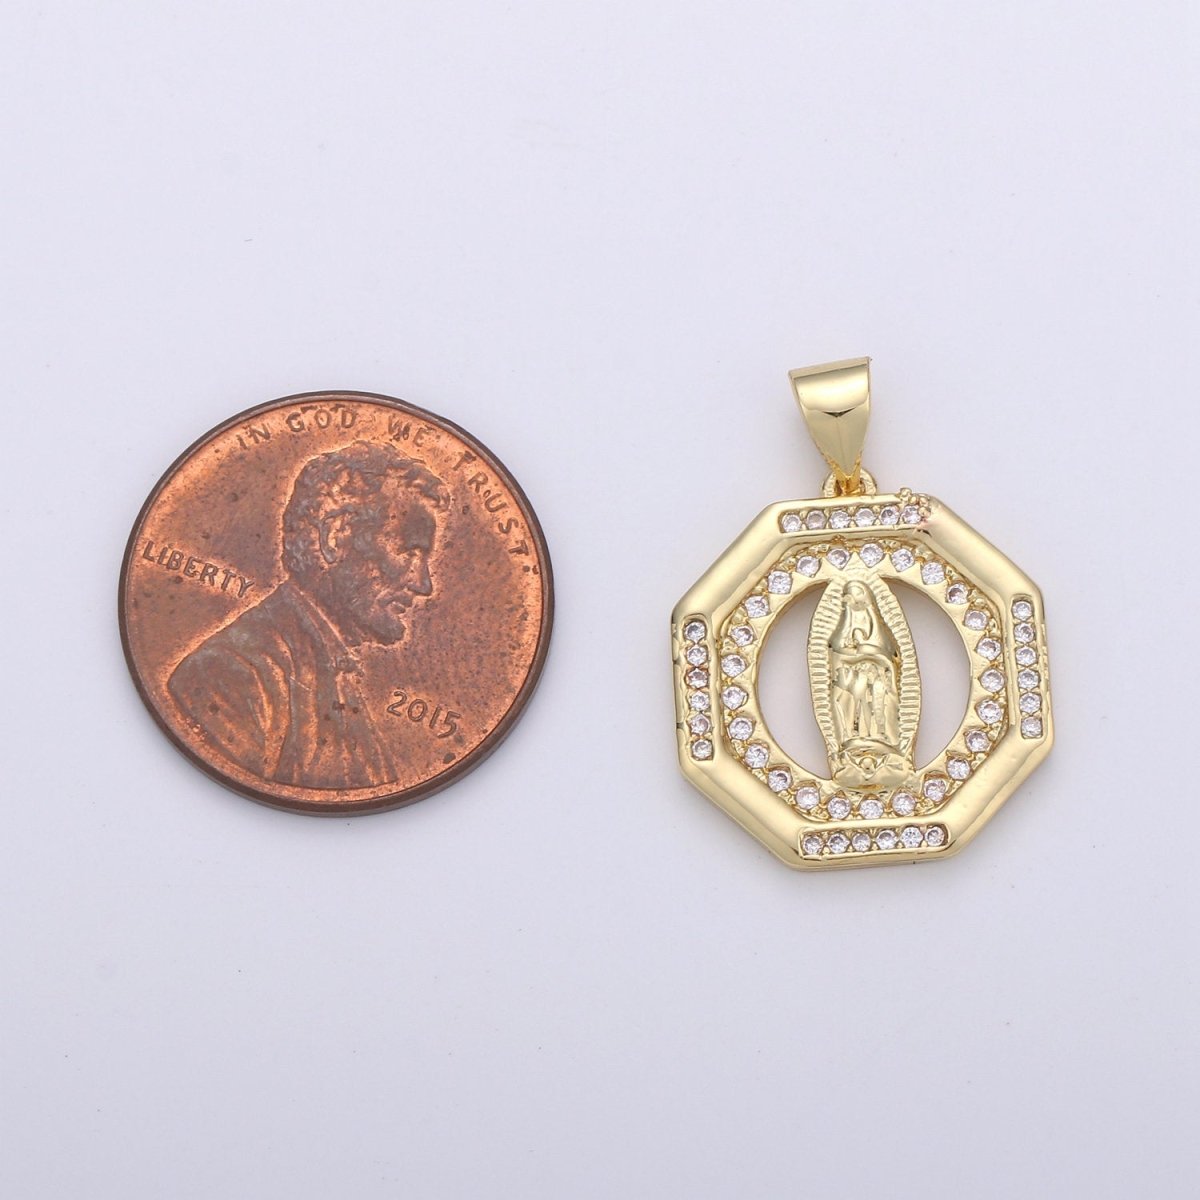 Dainty 24k Gold Filled Virgin Mary Medallion Necklace Octagon Virgin Mary Pendant for Religious Necklace Lady Guadalupe Charm 23x18mm, D-083 - DLUXCA